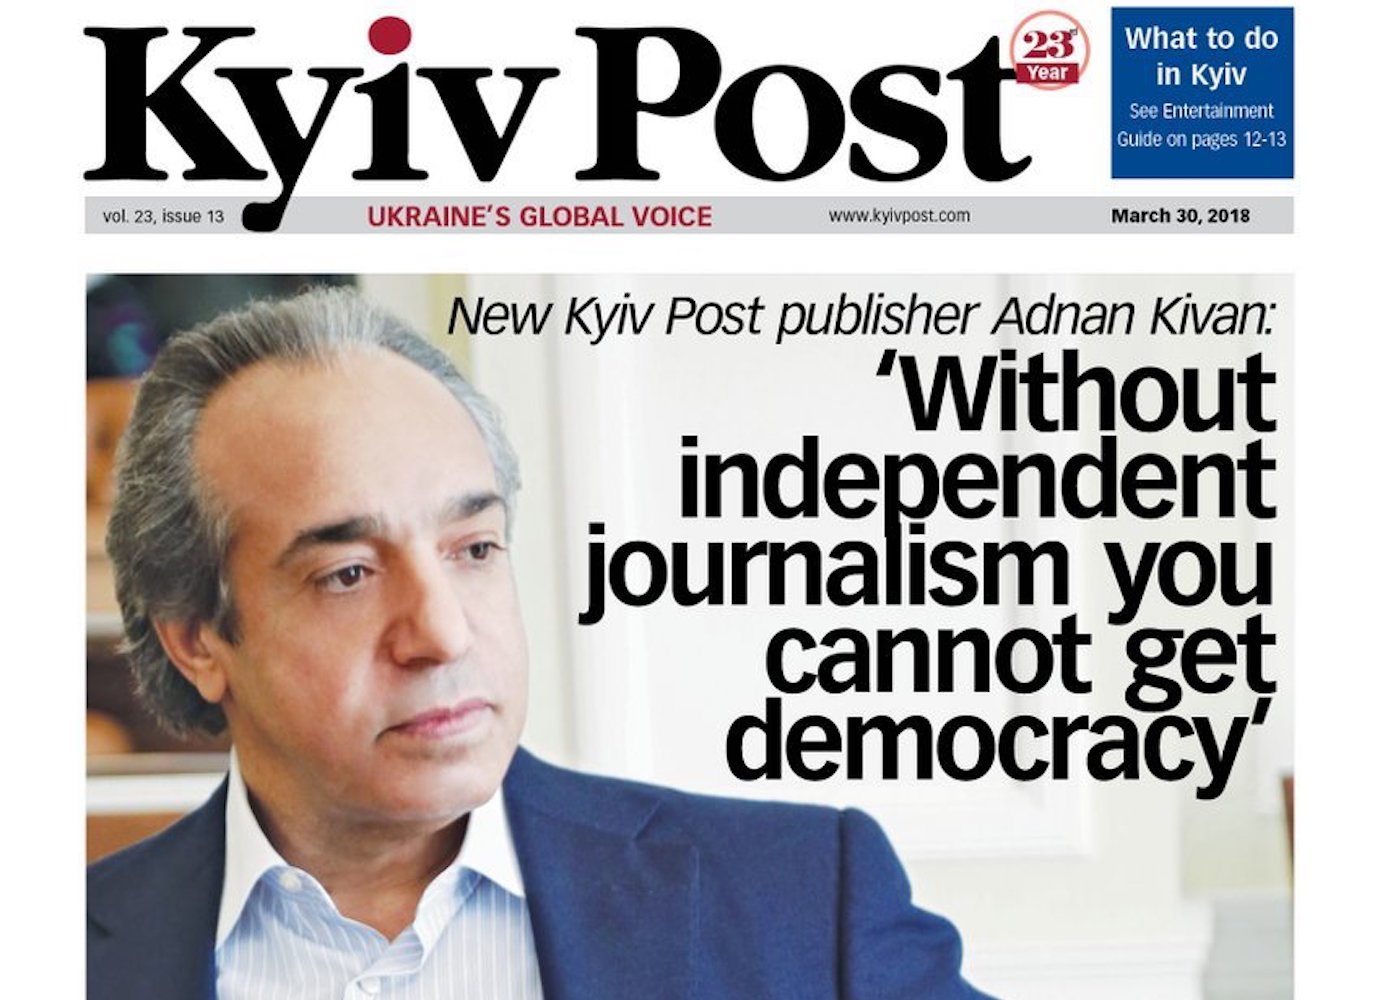 Kyiv Post closes amid row over editorial independence